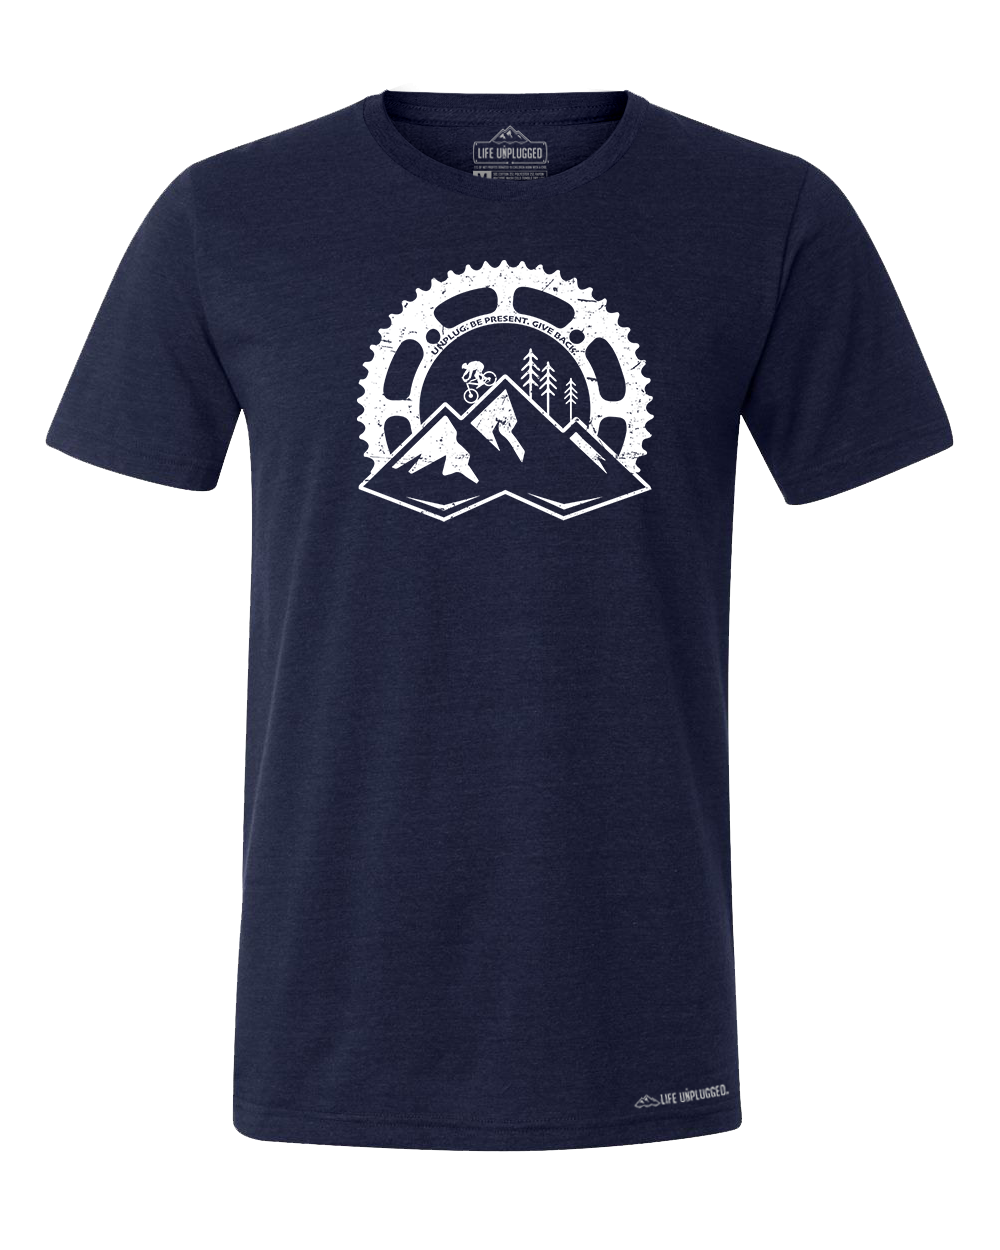 Riding Into The Sunset Premium Triblend T-Shirt